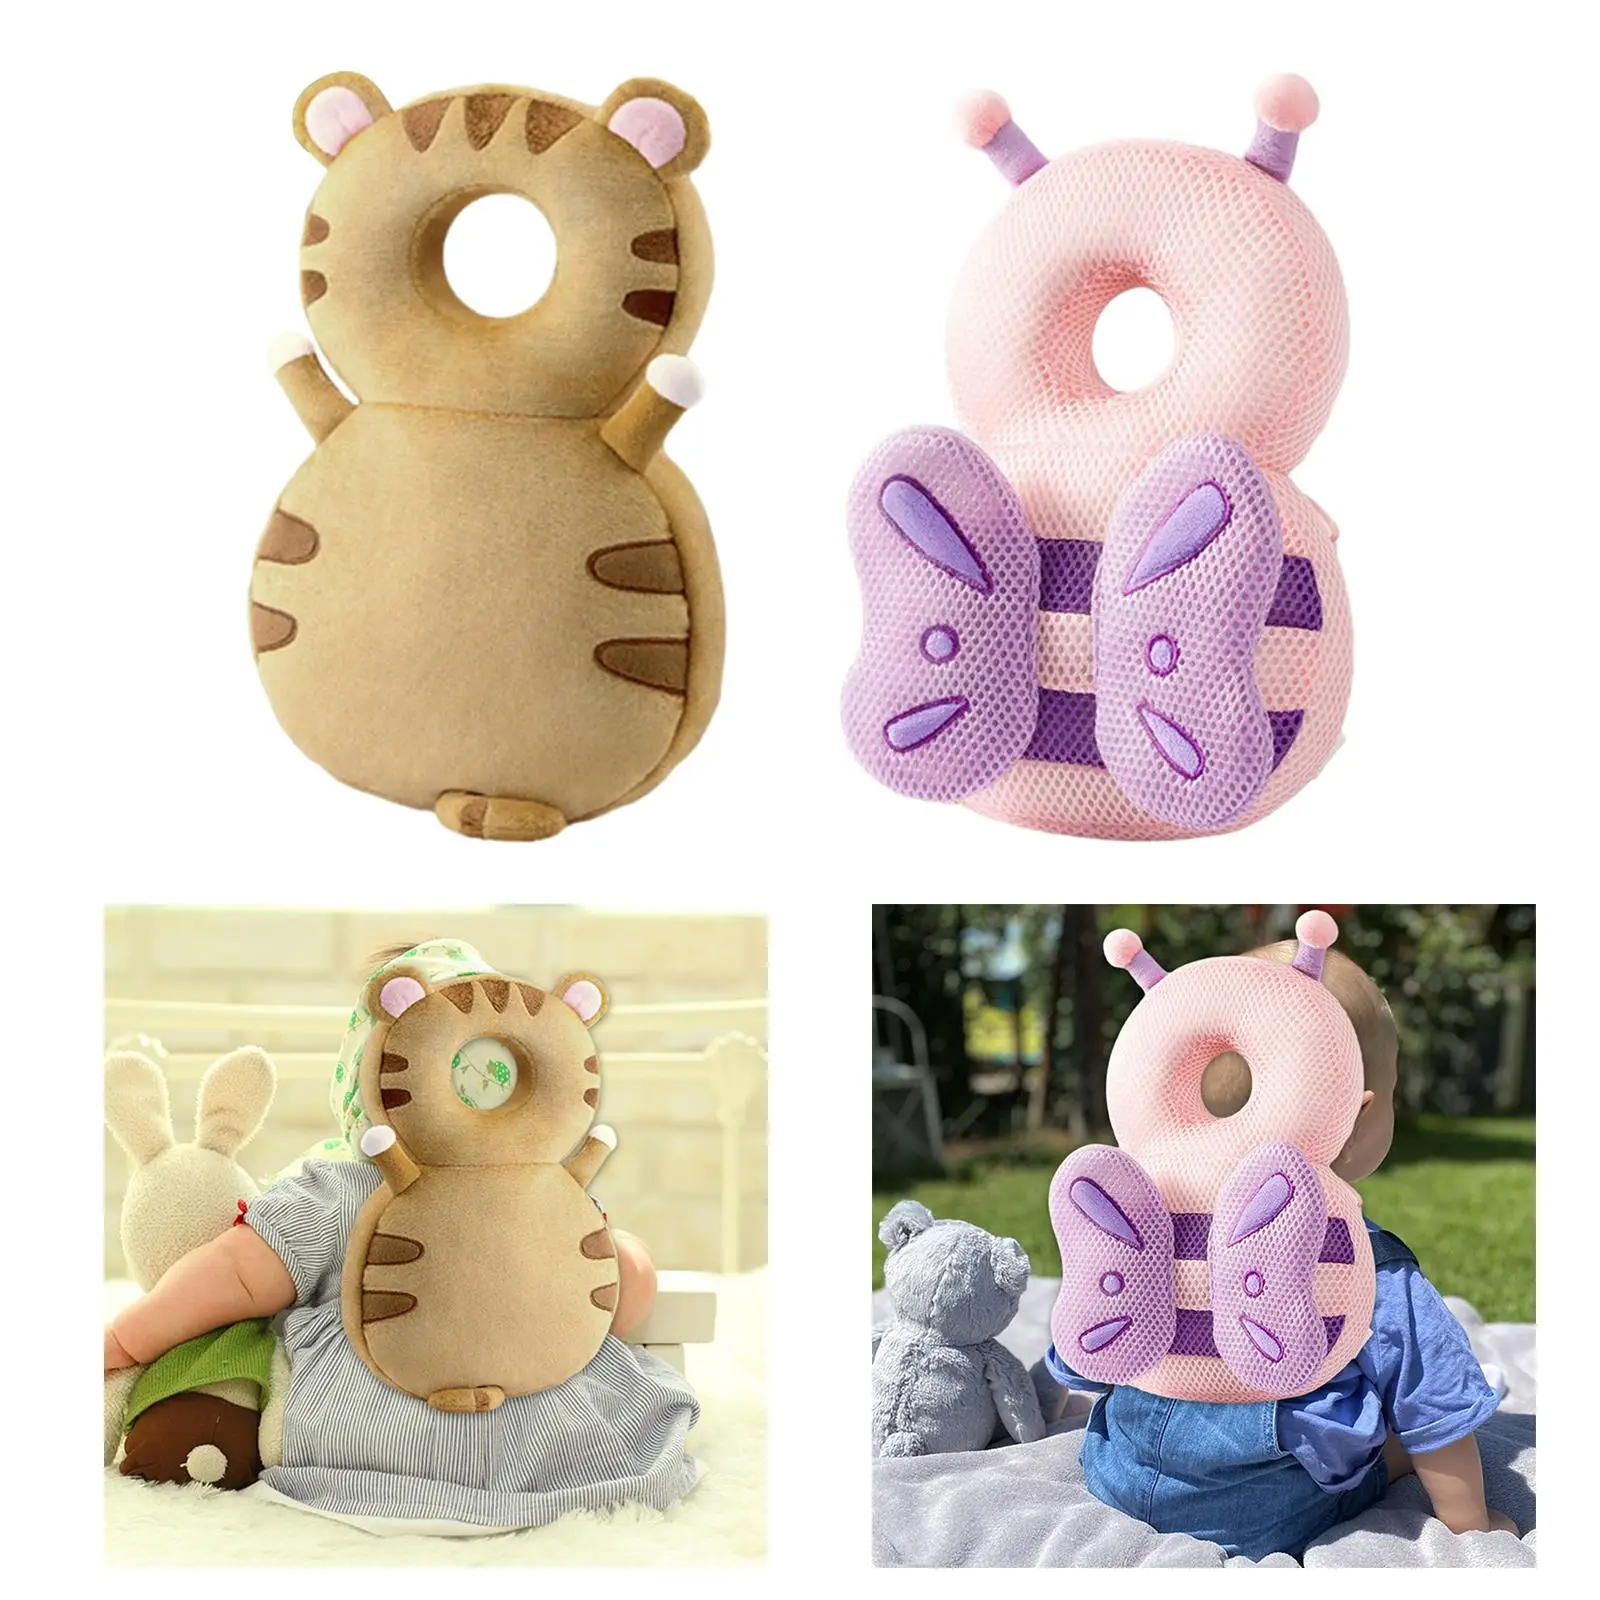 Baby Back Protection Cute Portable Soft Anti Fall Animal Shape Baby Head Protector Backpack Wear for Walking Crawling Infant